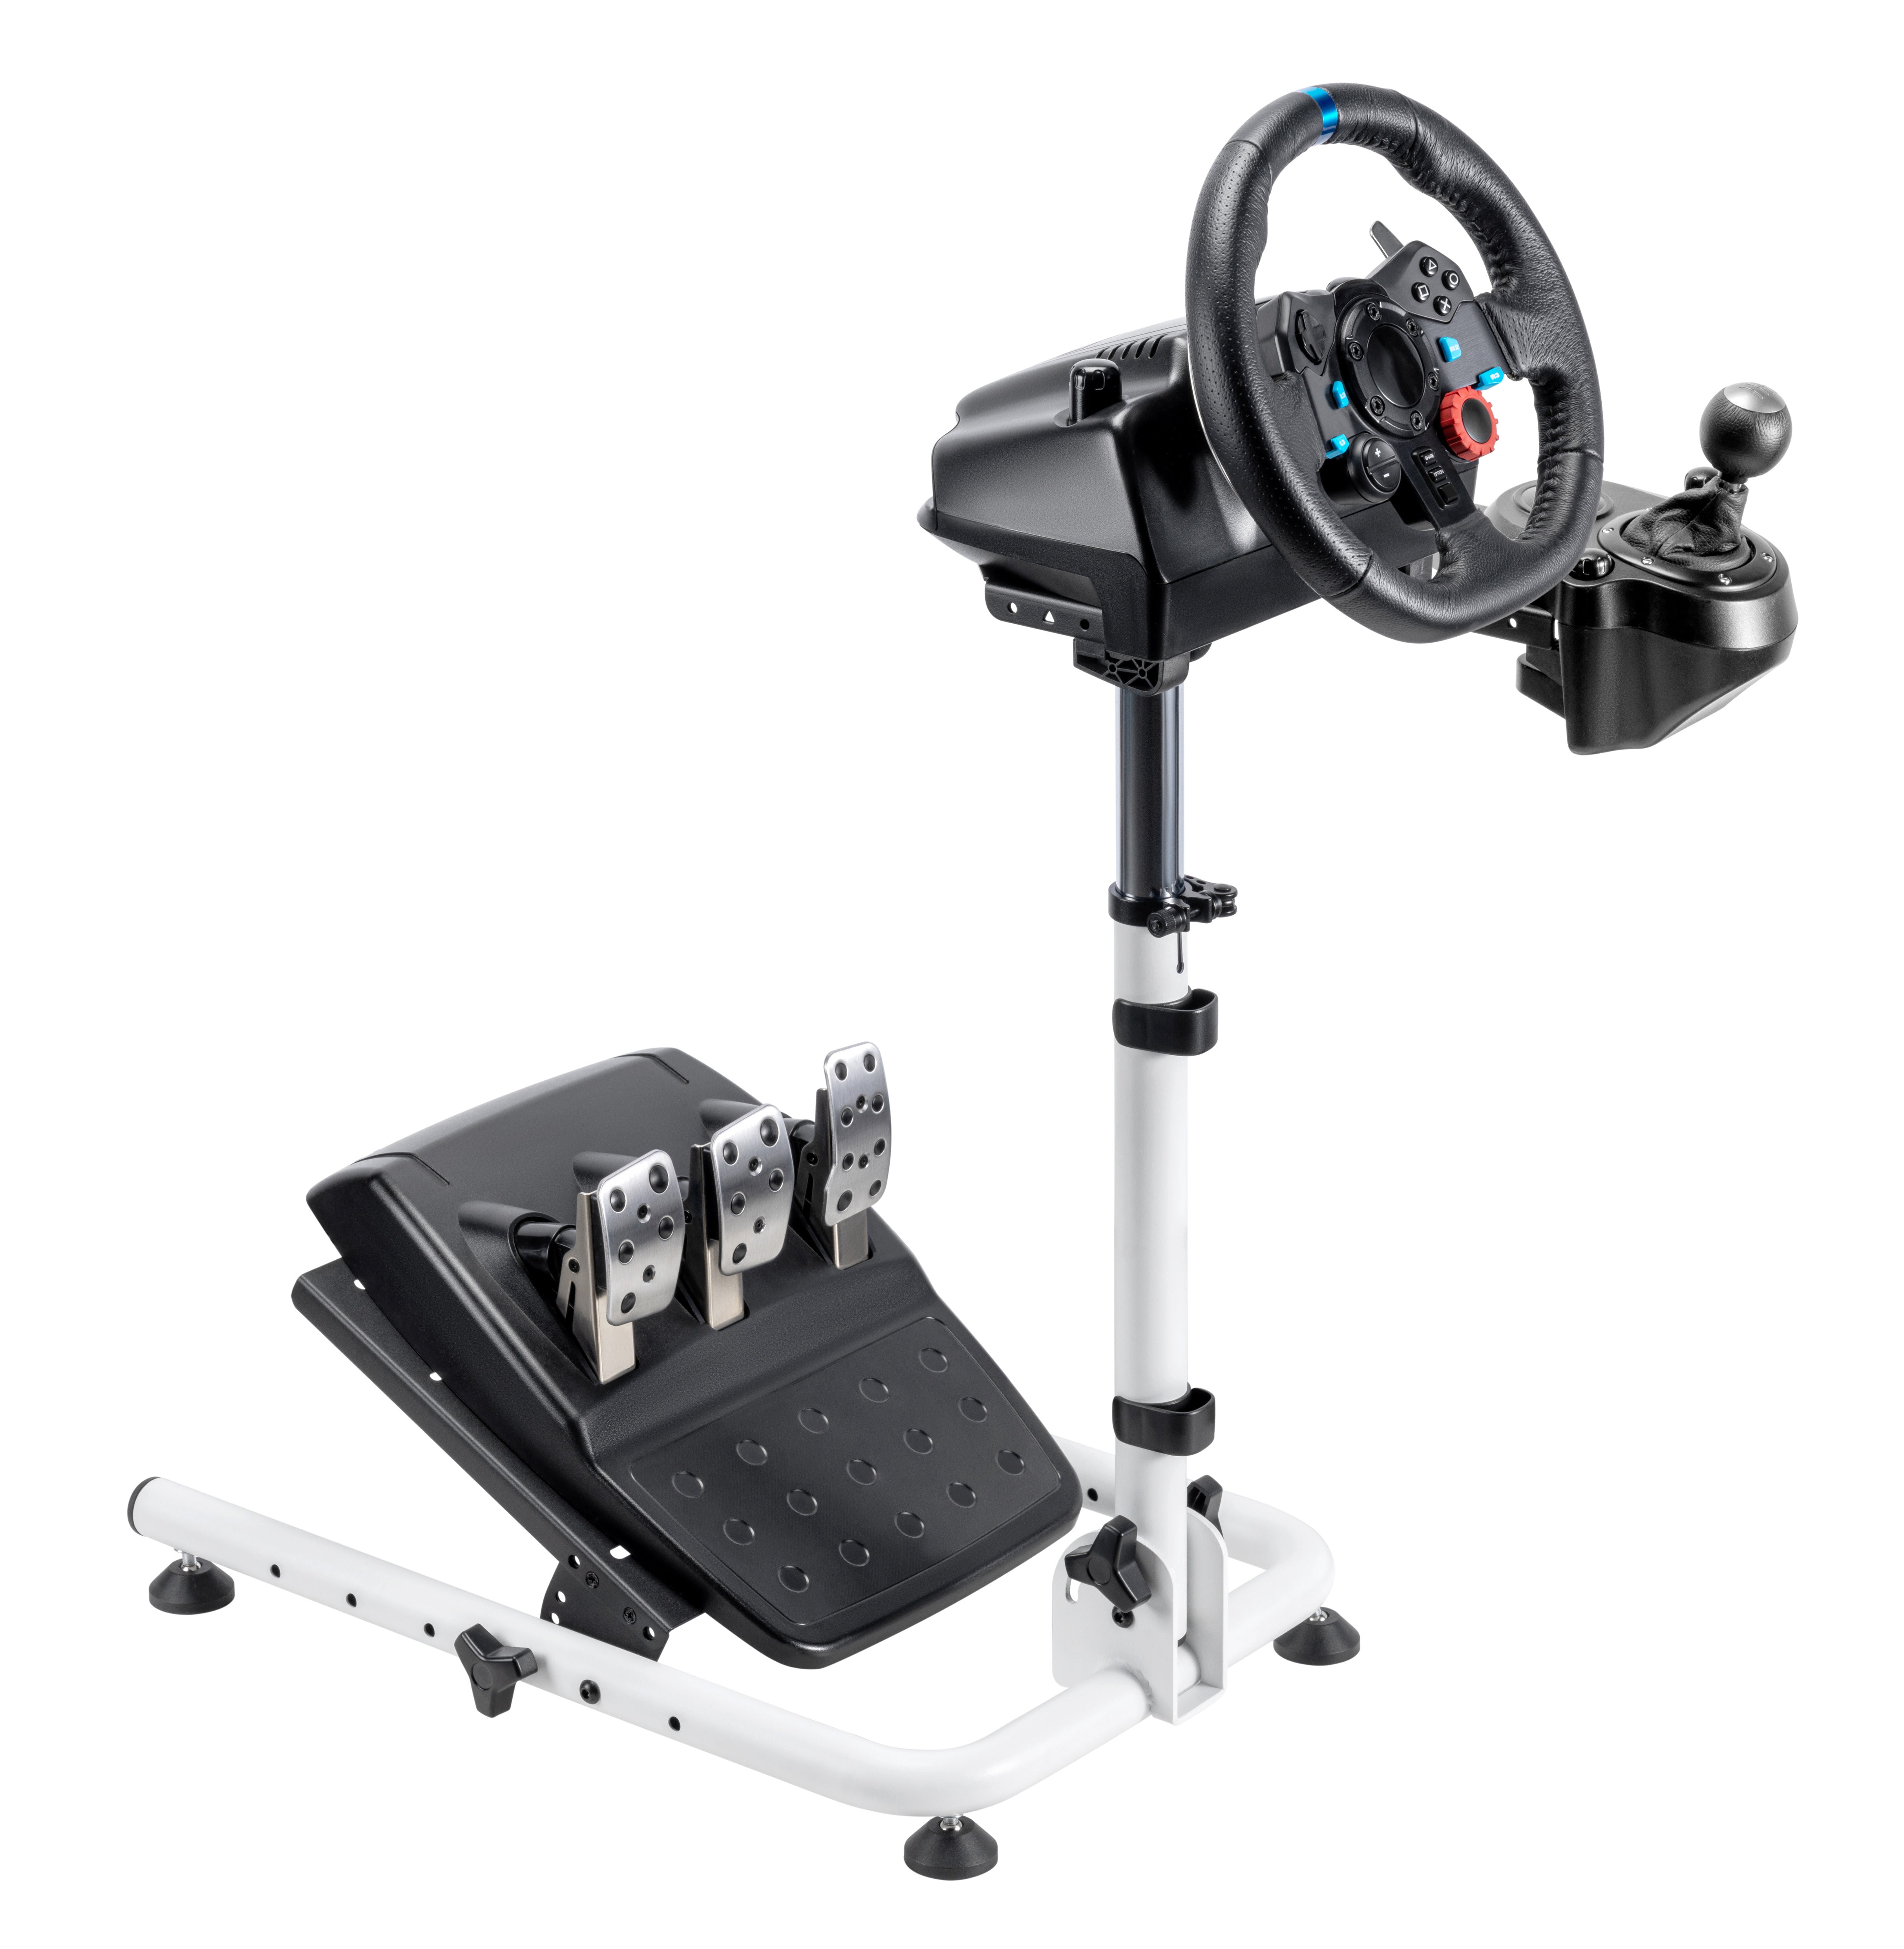 The Ultimate Steering Wheel Stand V2